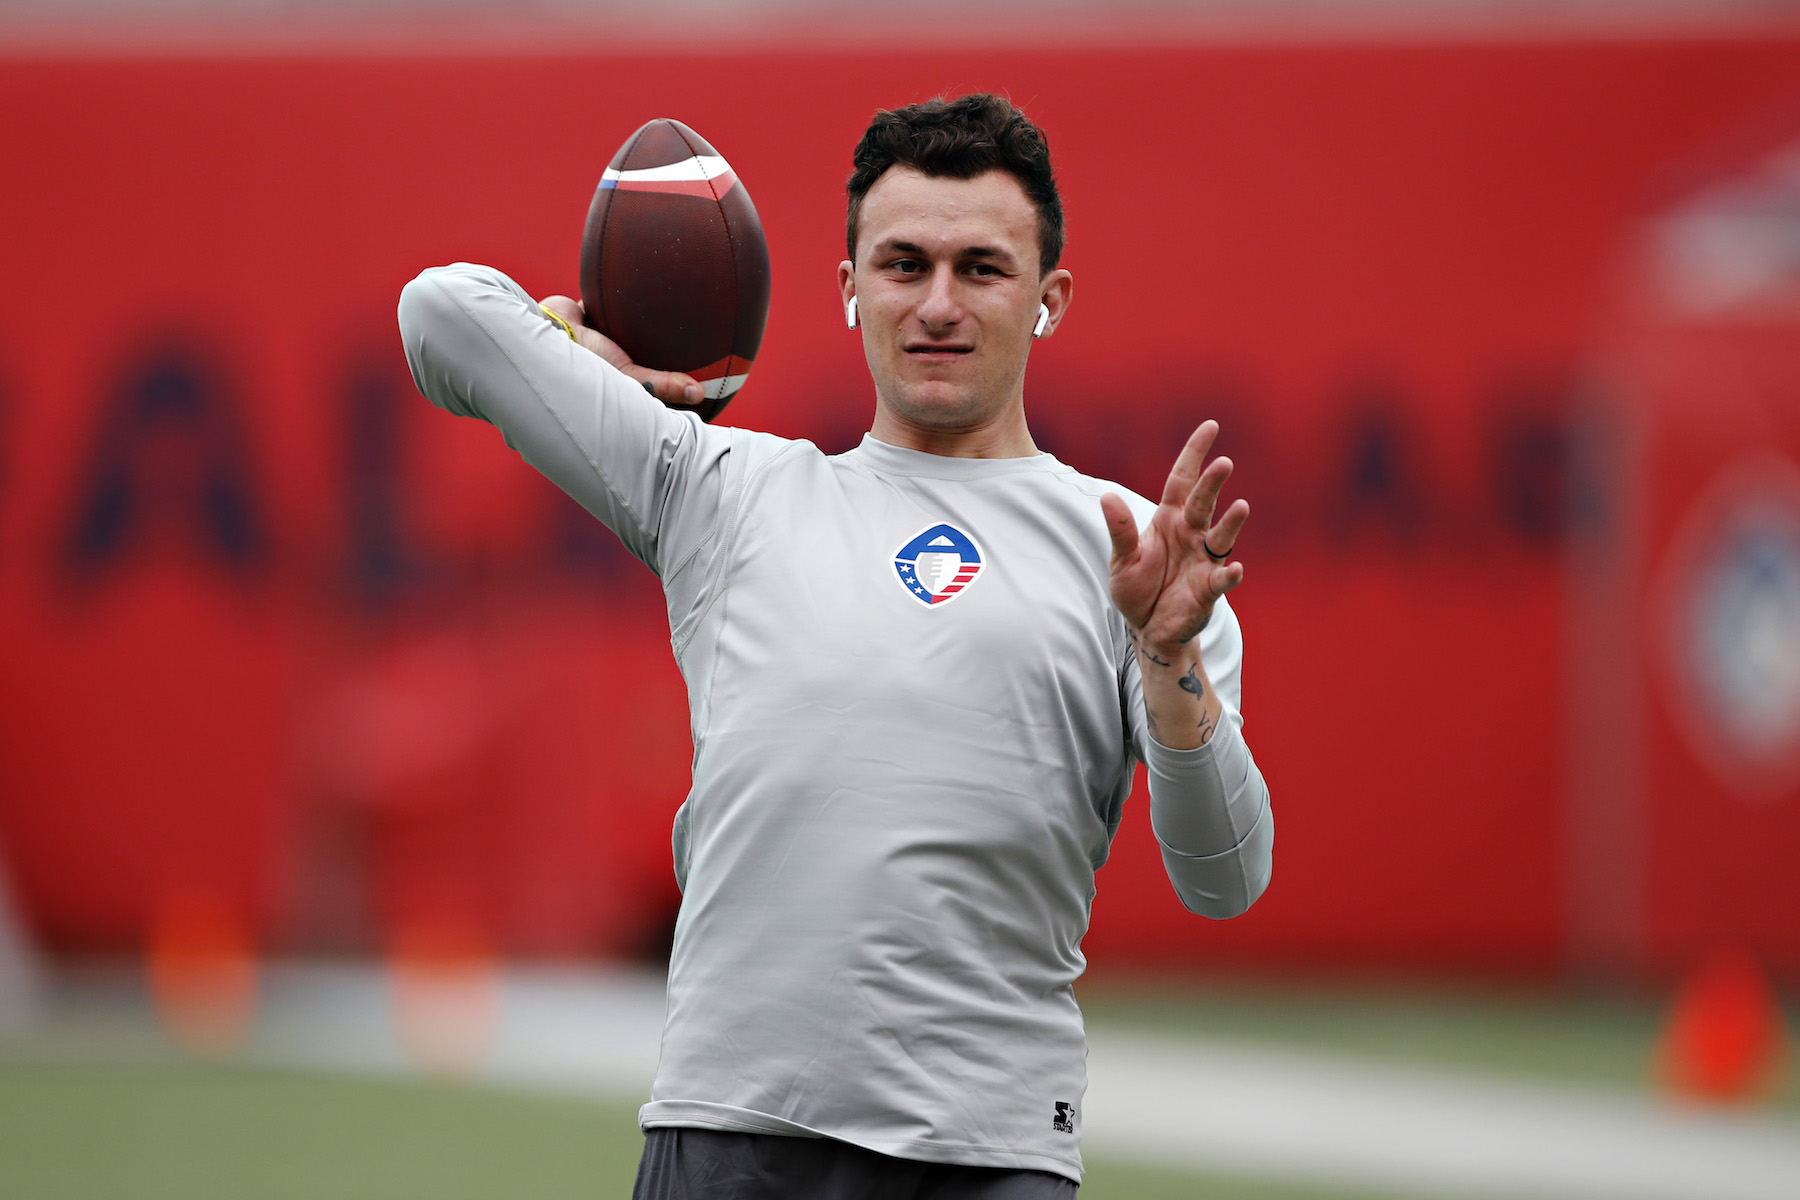 Johnny Manziel Has Finally Put Professional Football Behind Him and He